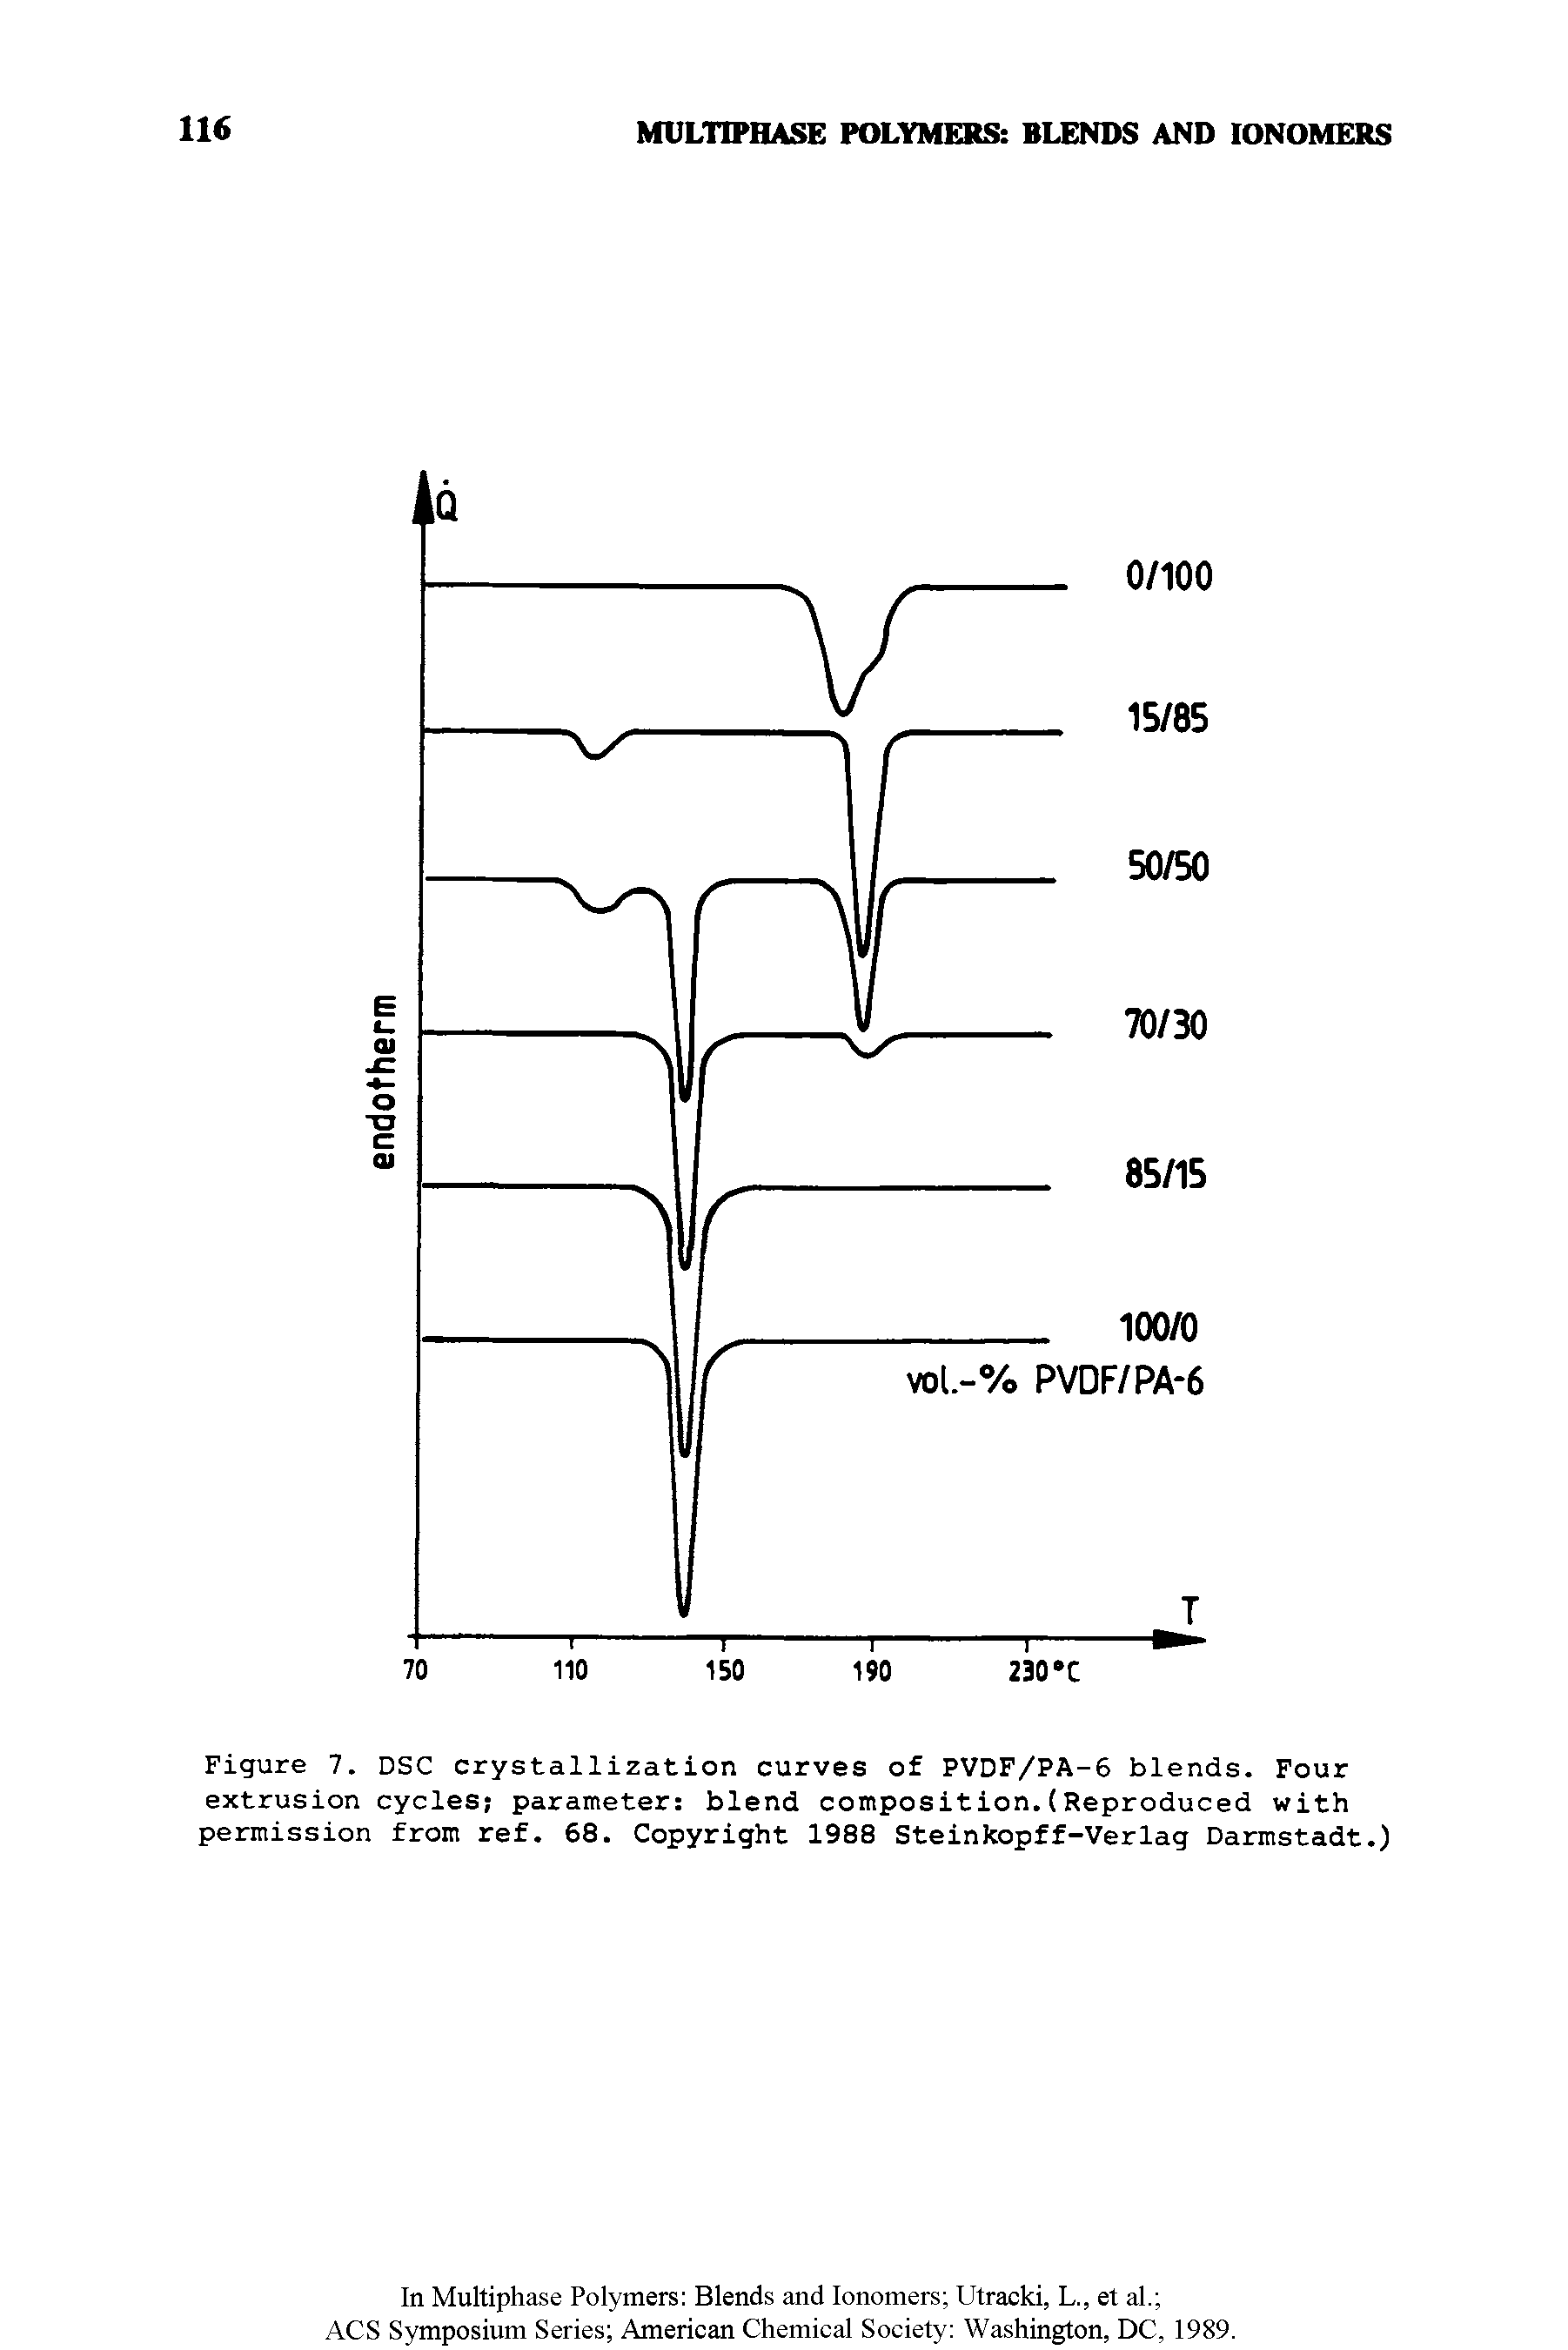 Figure 7. DSC crystallization curves of PVDF/PA-6 blends. Four extrusion cycles parameter blend composition. (Reproduced with permission from ref. 68. Copyright 1988 Steinkopff-Verlag Darmstadt.)...